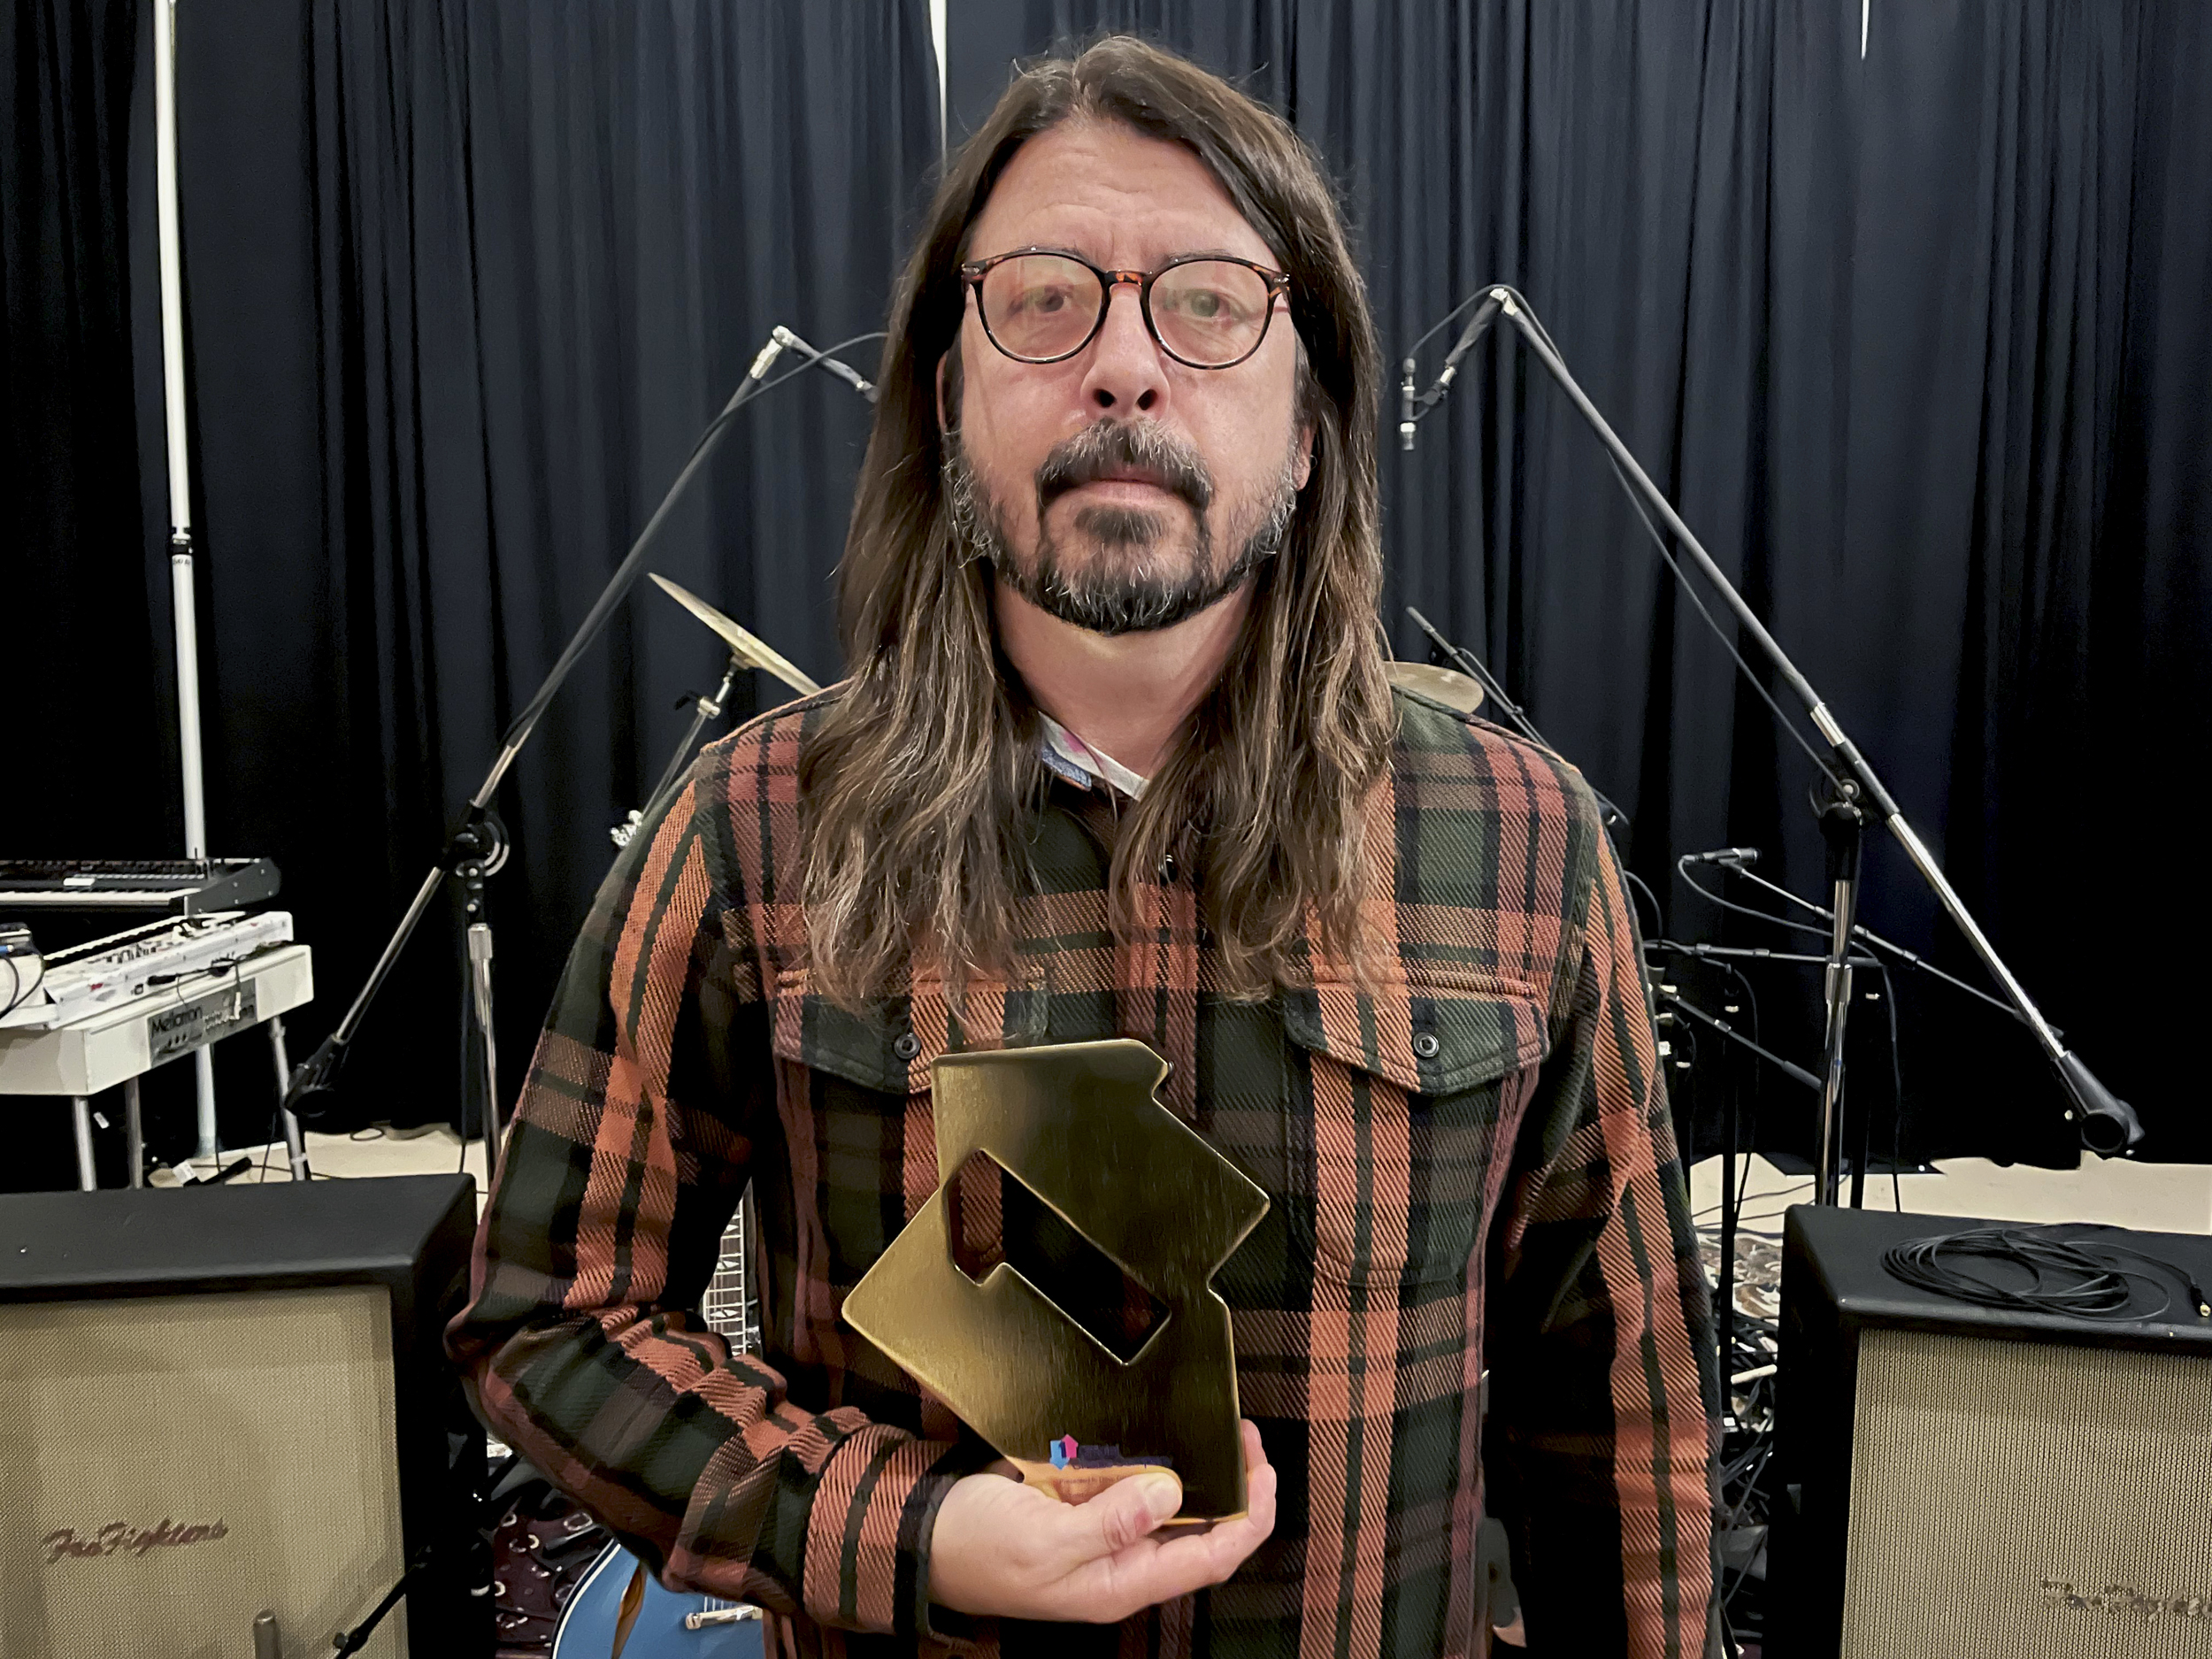 Dave Grohl of Foo Fighters with his Number 1 award for Medicine at Midnight